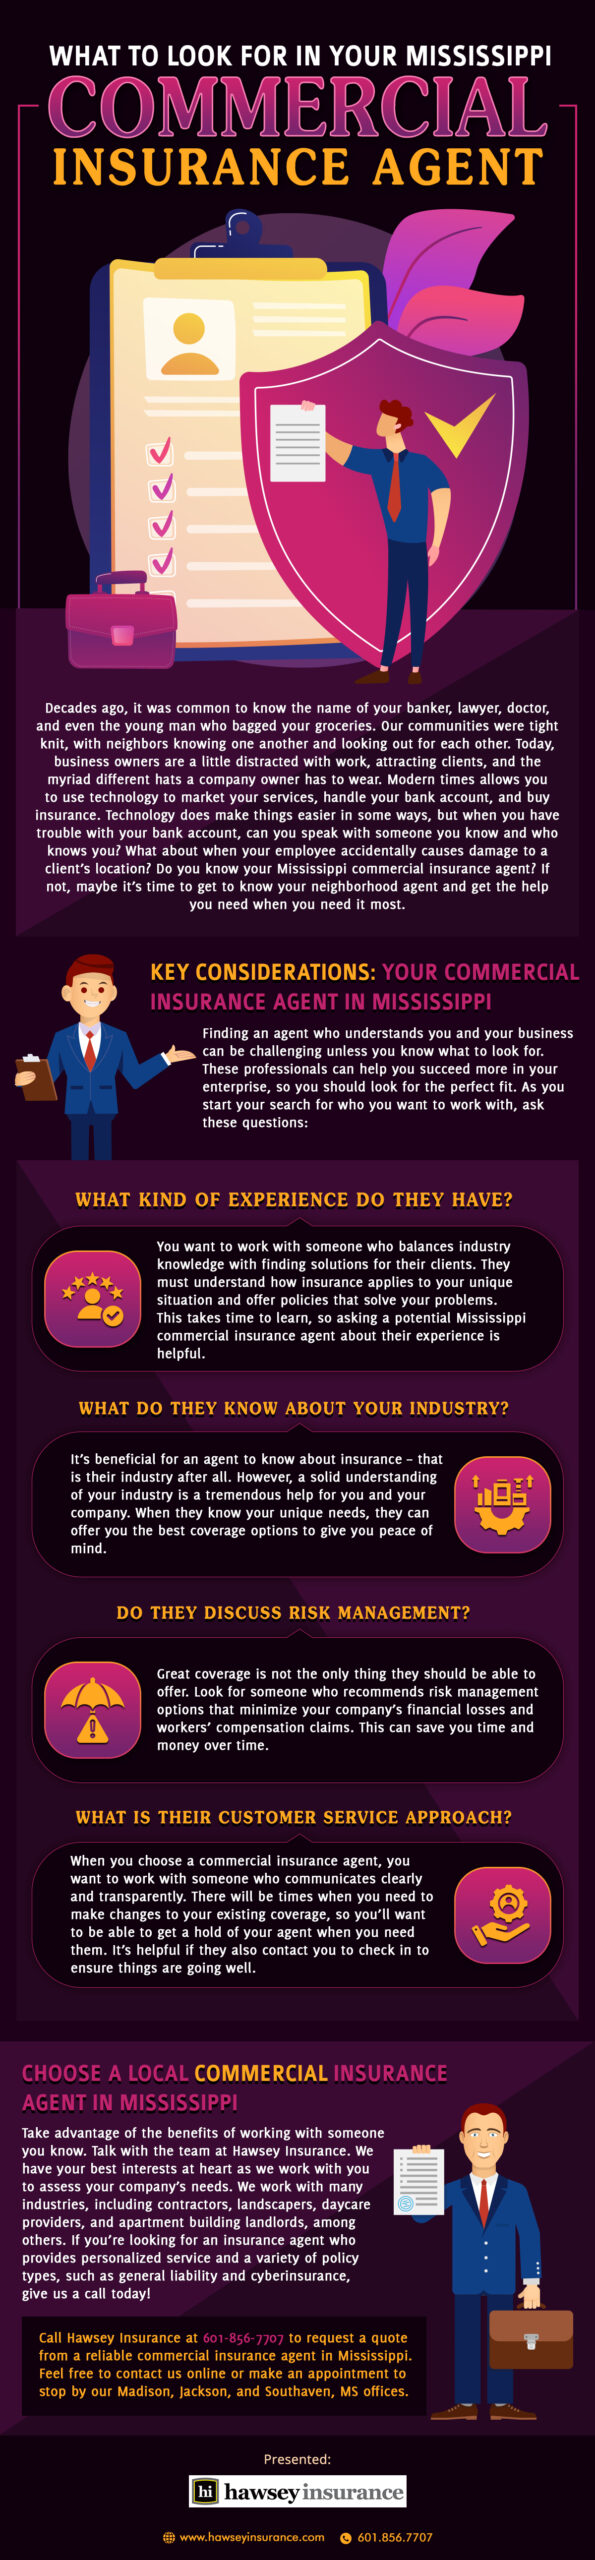 What to Look for in Your Mississippi Commercial Insurance Agent